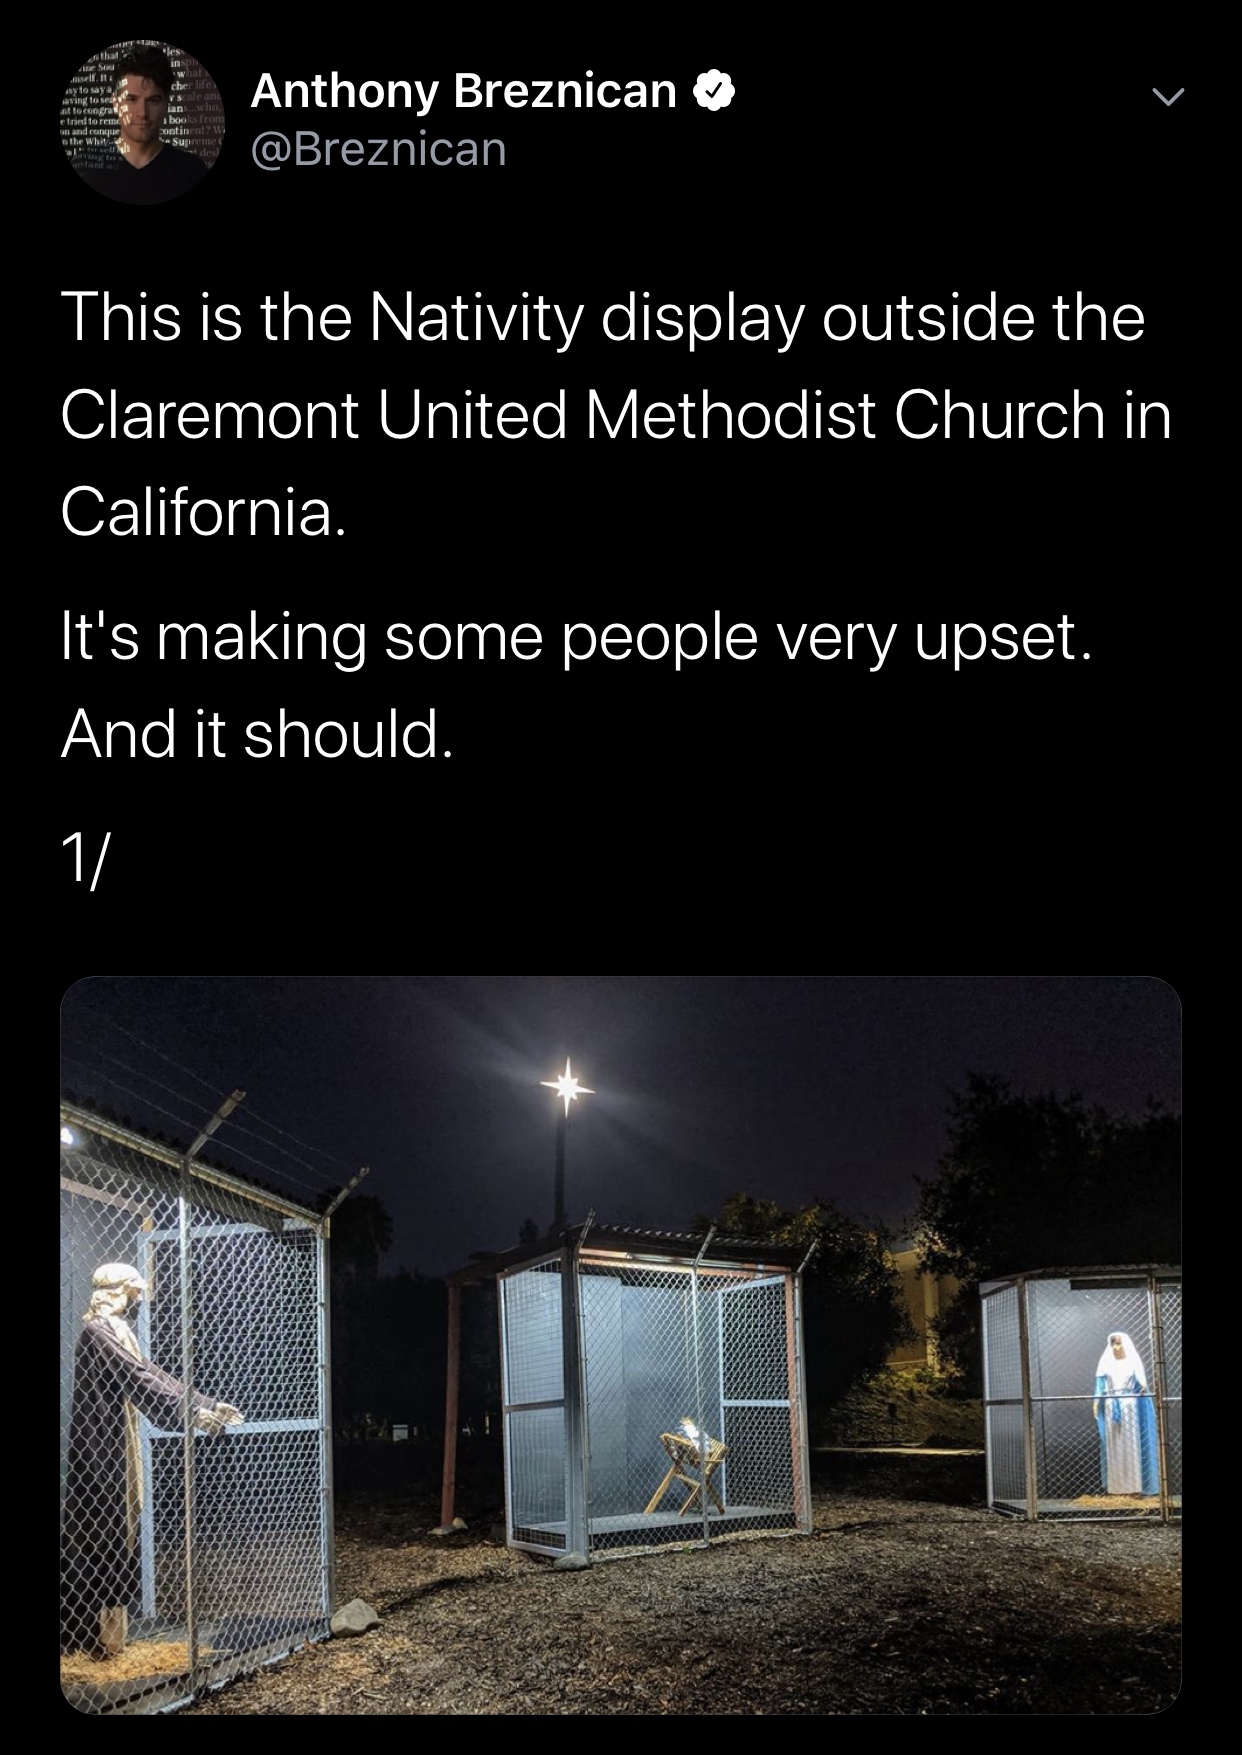 christmas meme - Jesus - Anthony Breznican This is the Nativity display outside the Claremont United Methodist Church in California. It's making some people very upset. And it should. 11